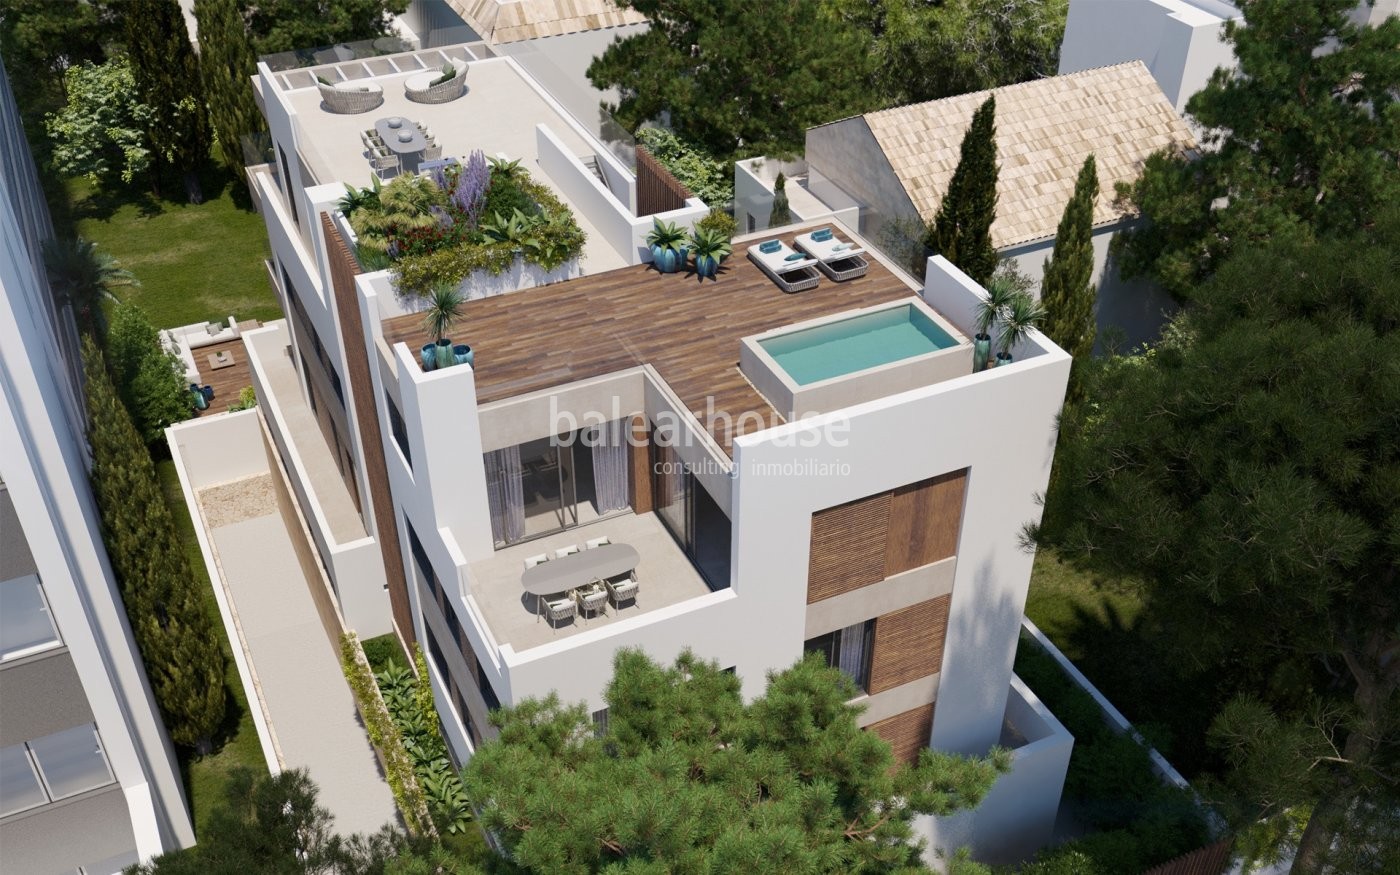 New contemporary housing project in Palma with magnificent pool and garden area